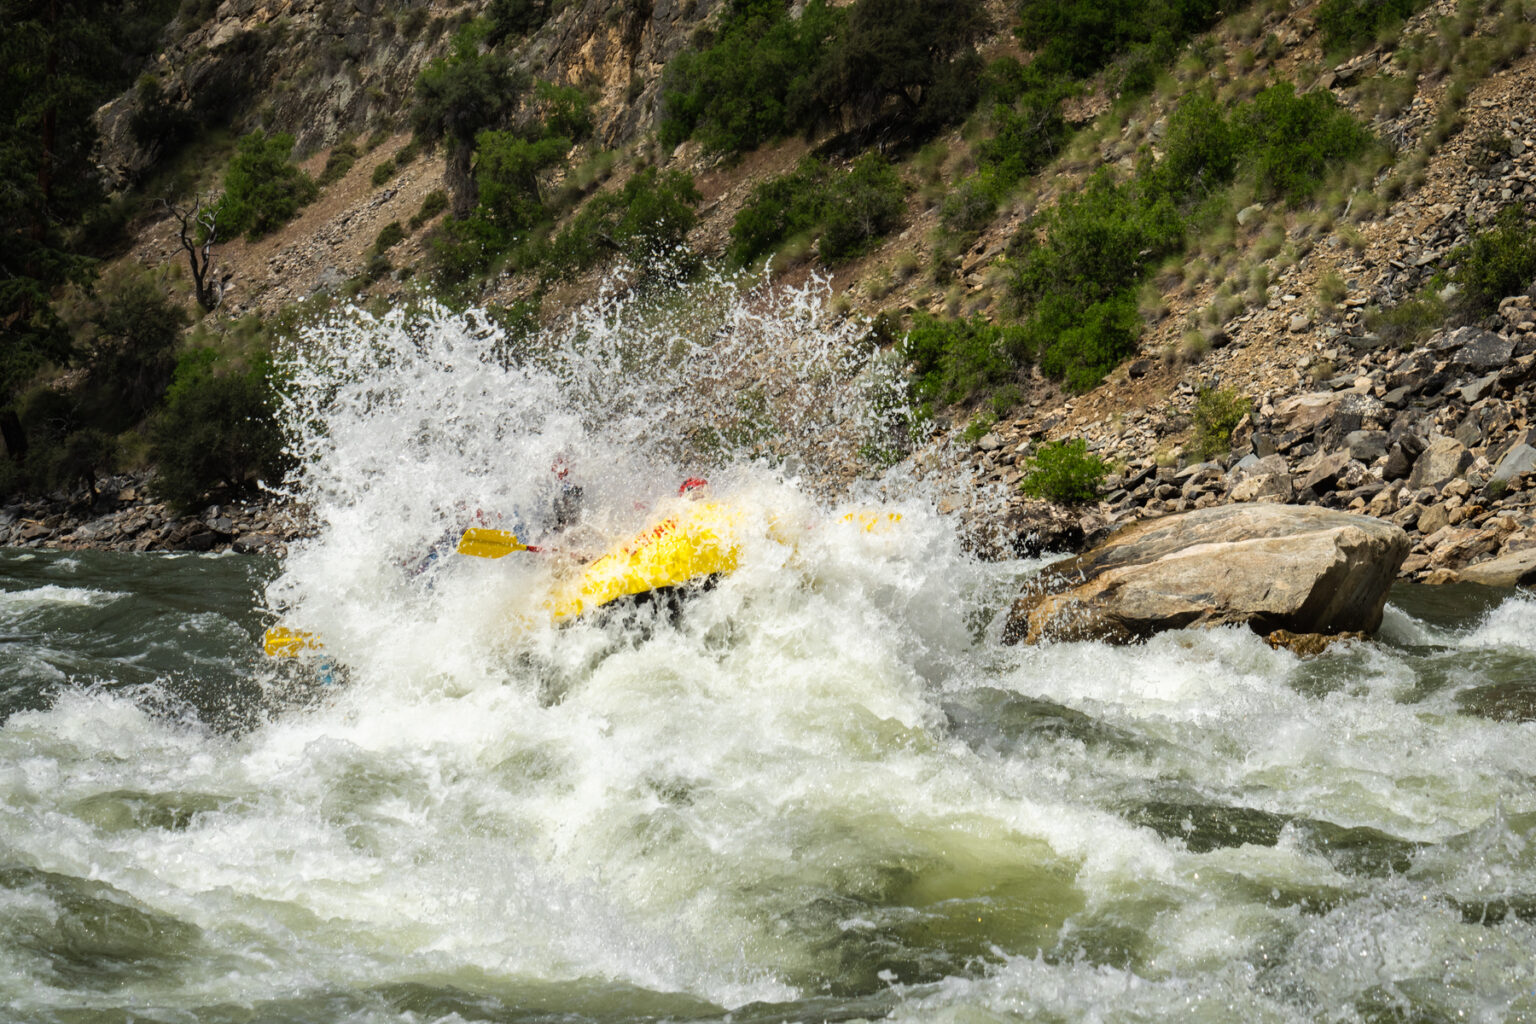 An OARS raft blasts through a rapid on the Middle Fork of the Salmon River in Idaho